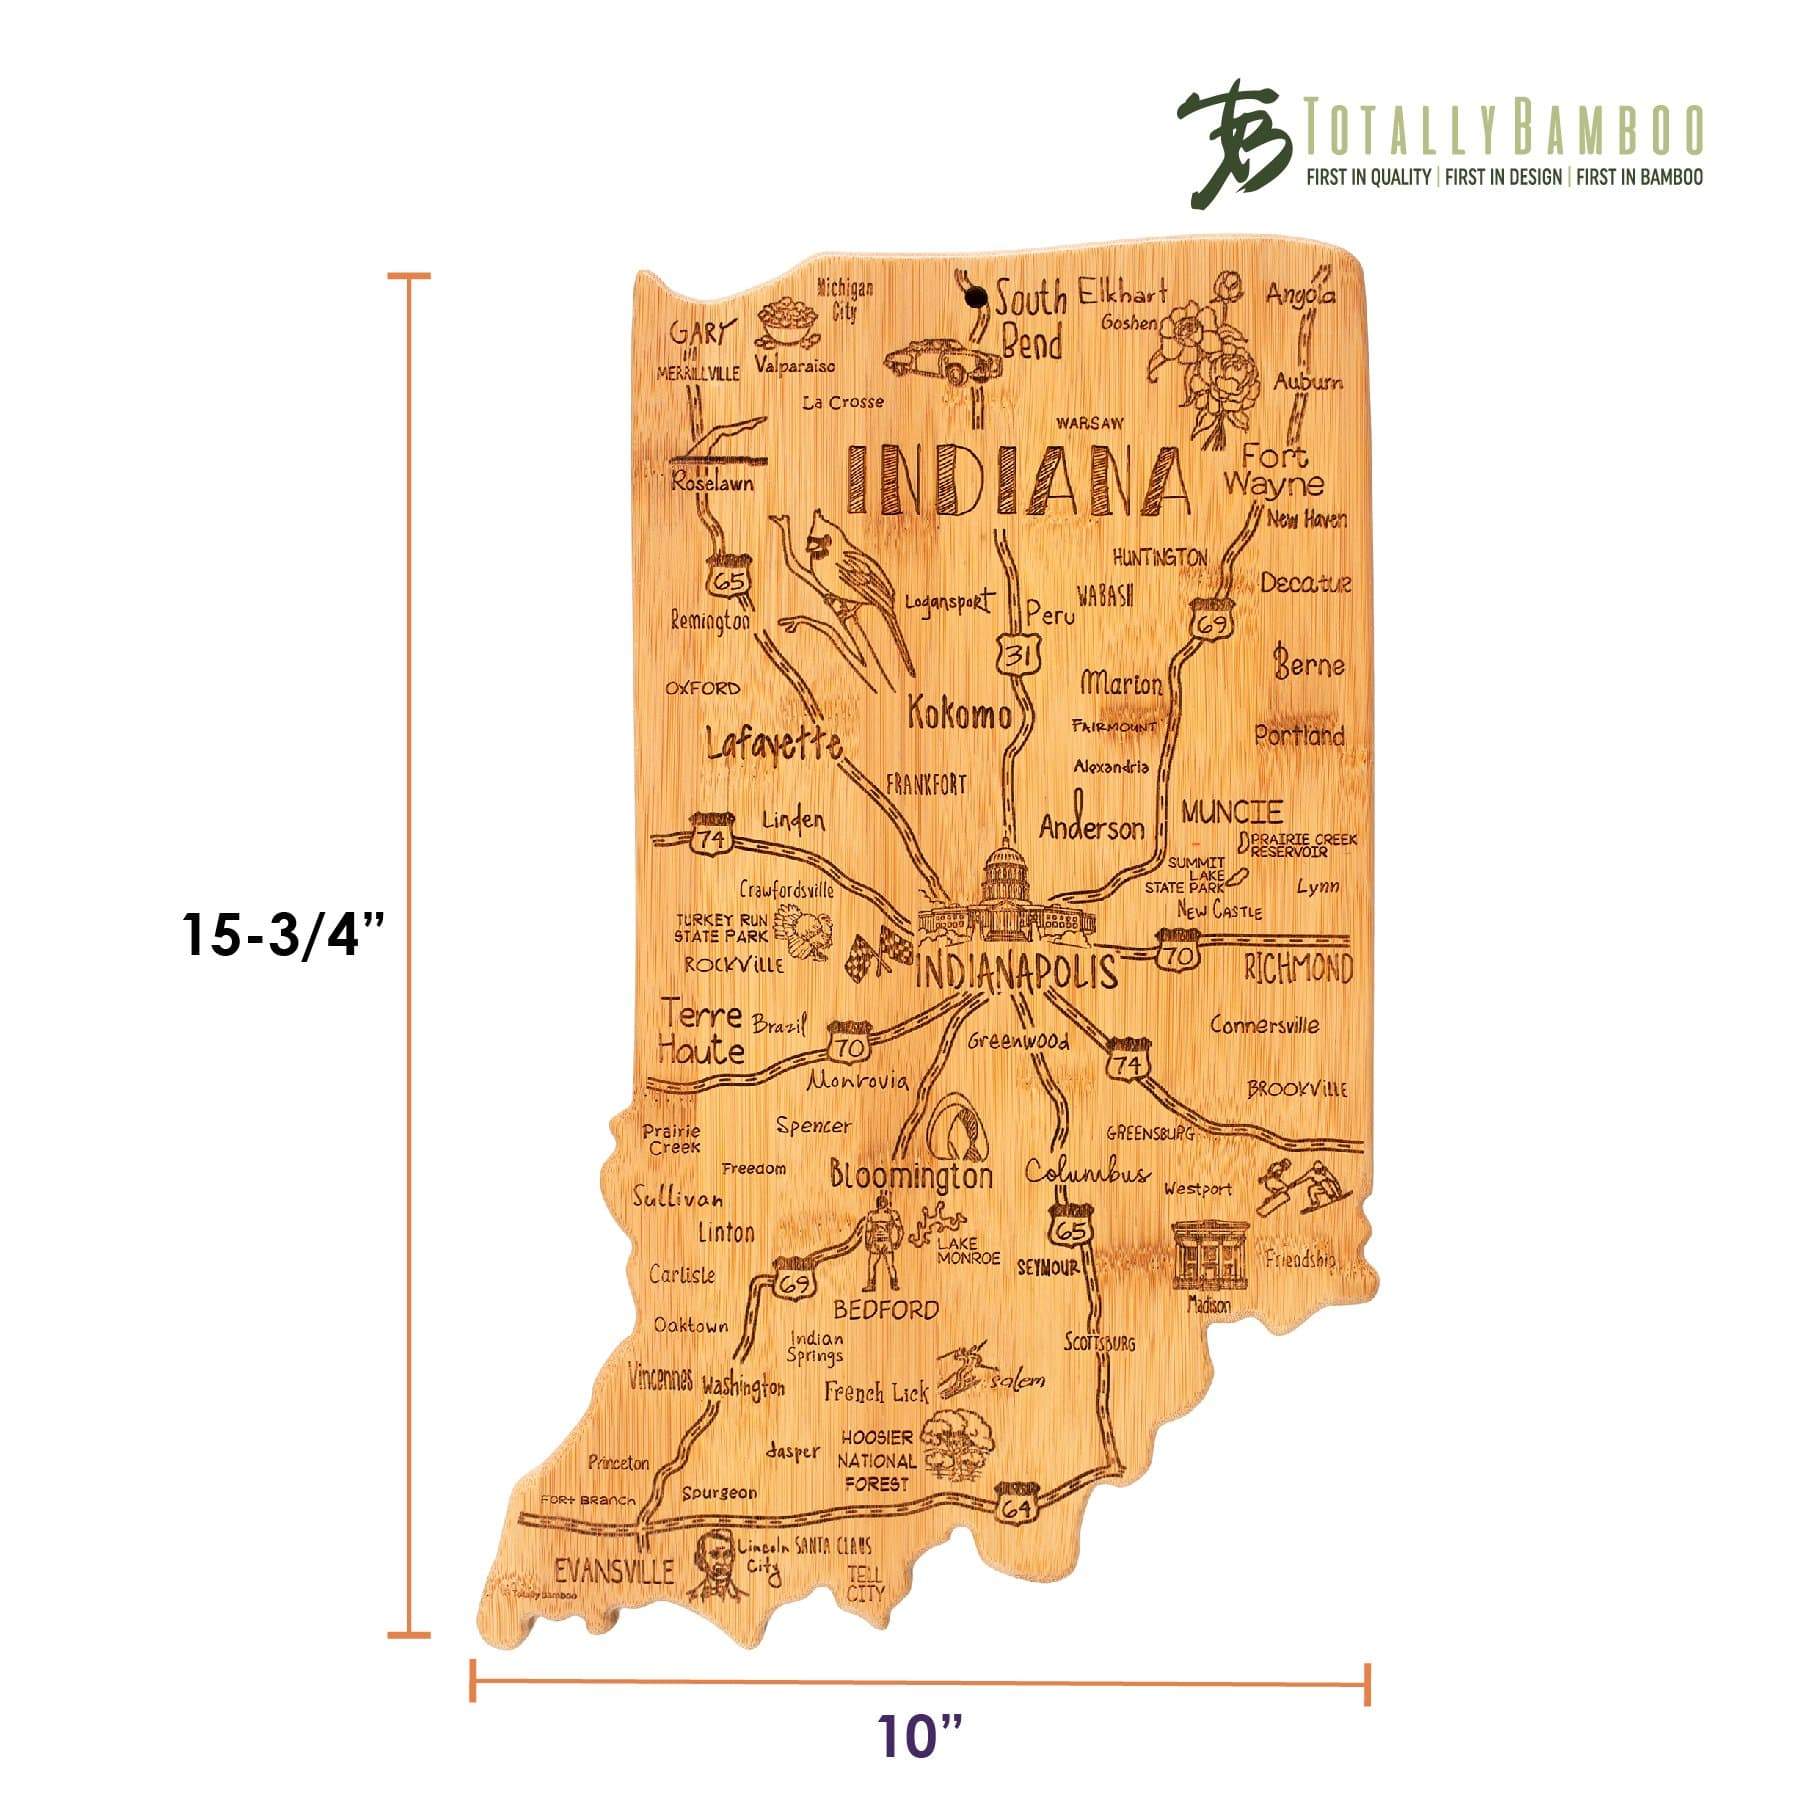 Totally Bamboo Destination Indiana State Shaped Bamboo Serving and Cutting Board